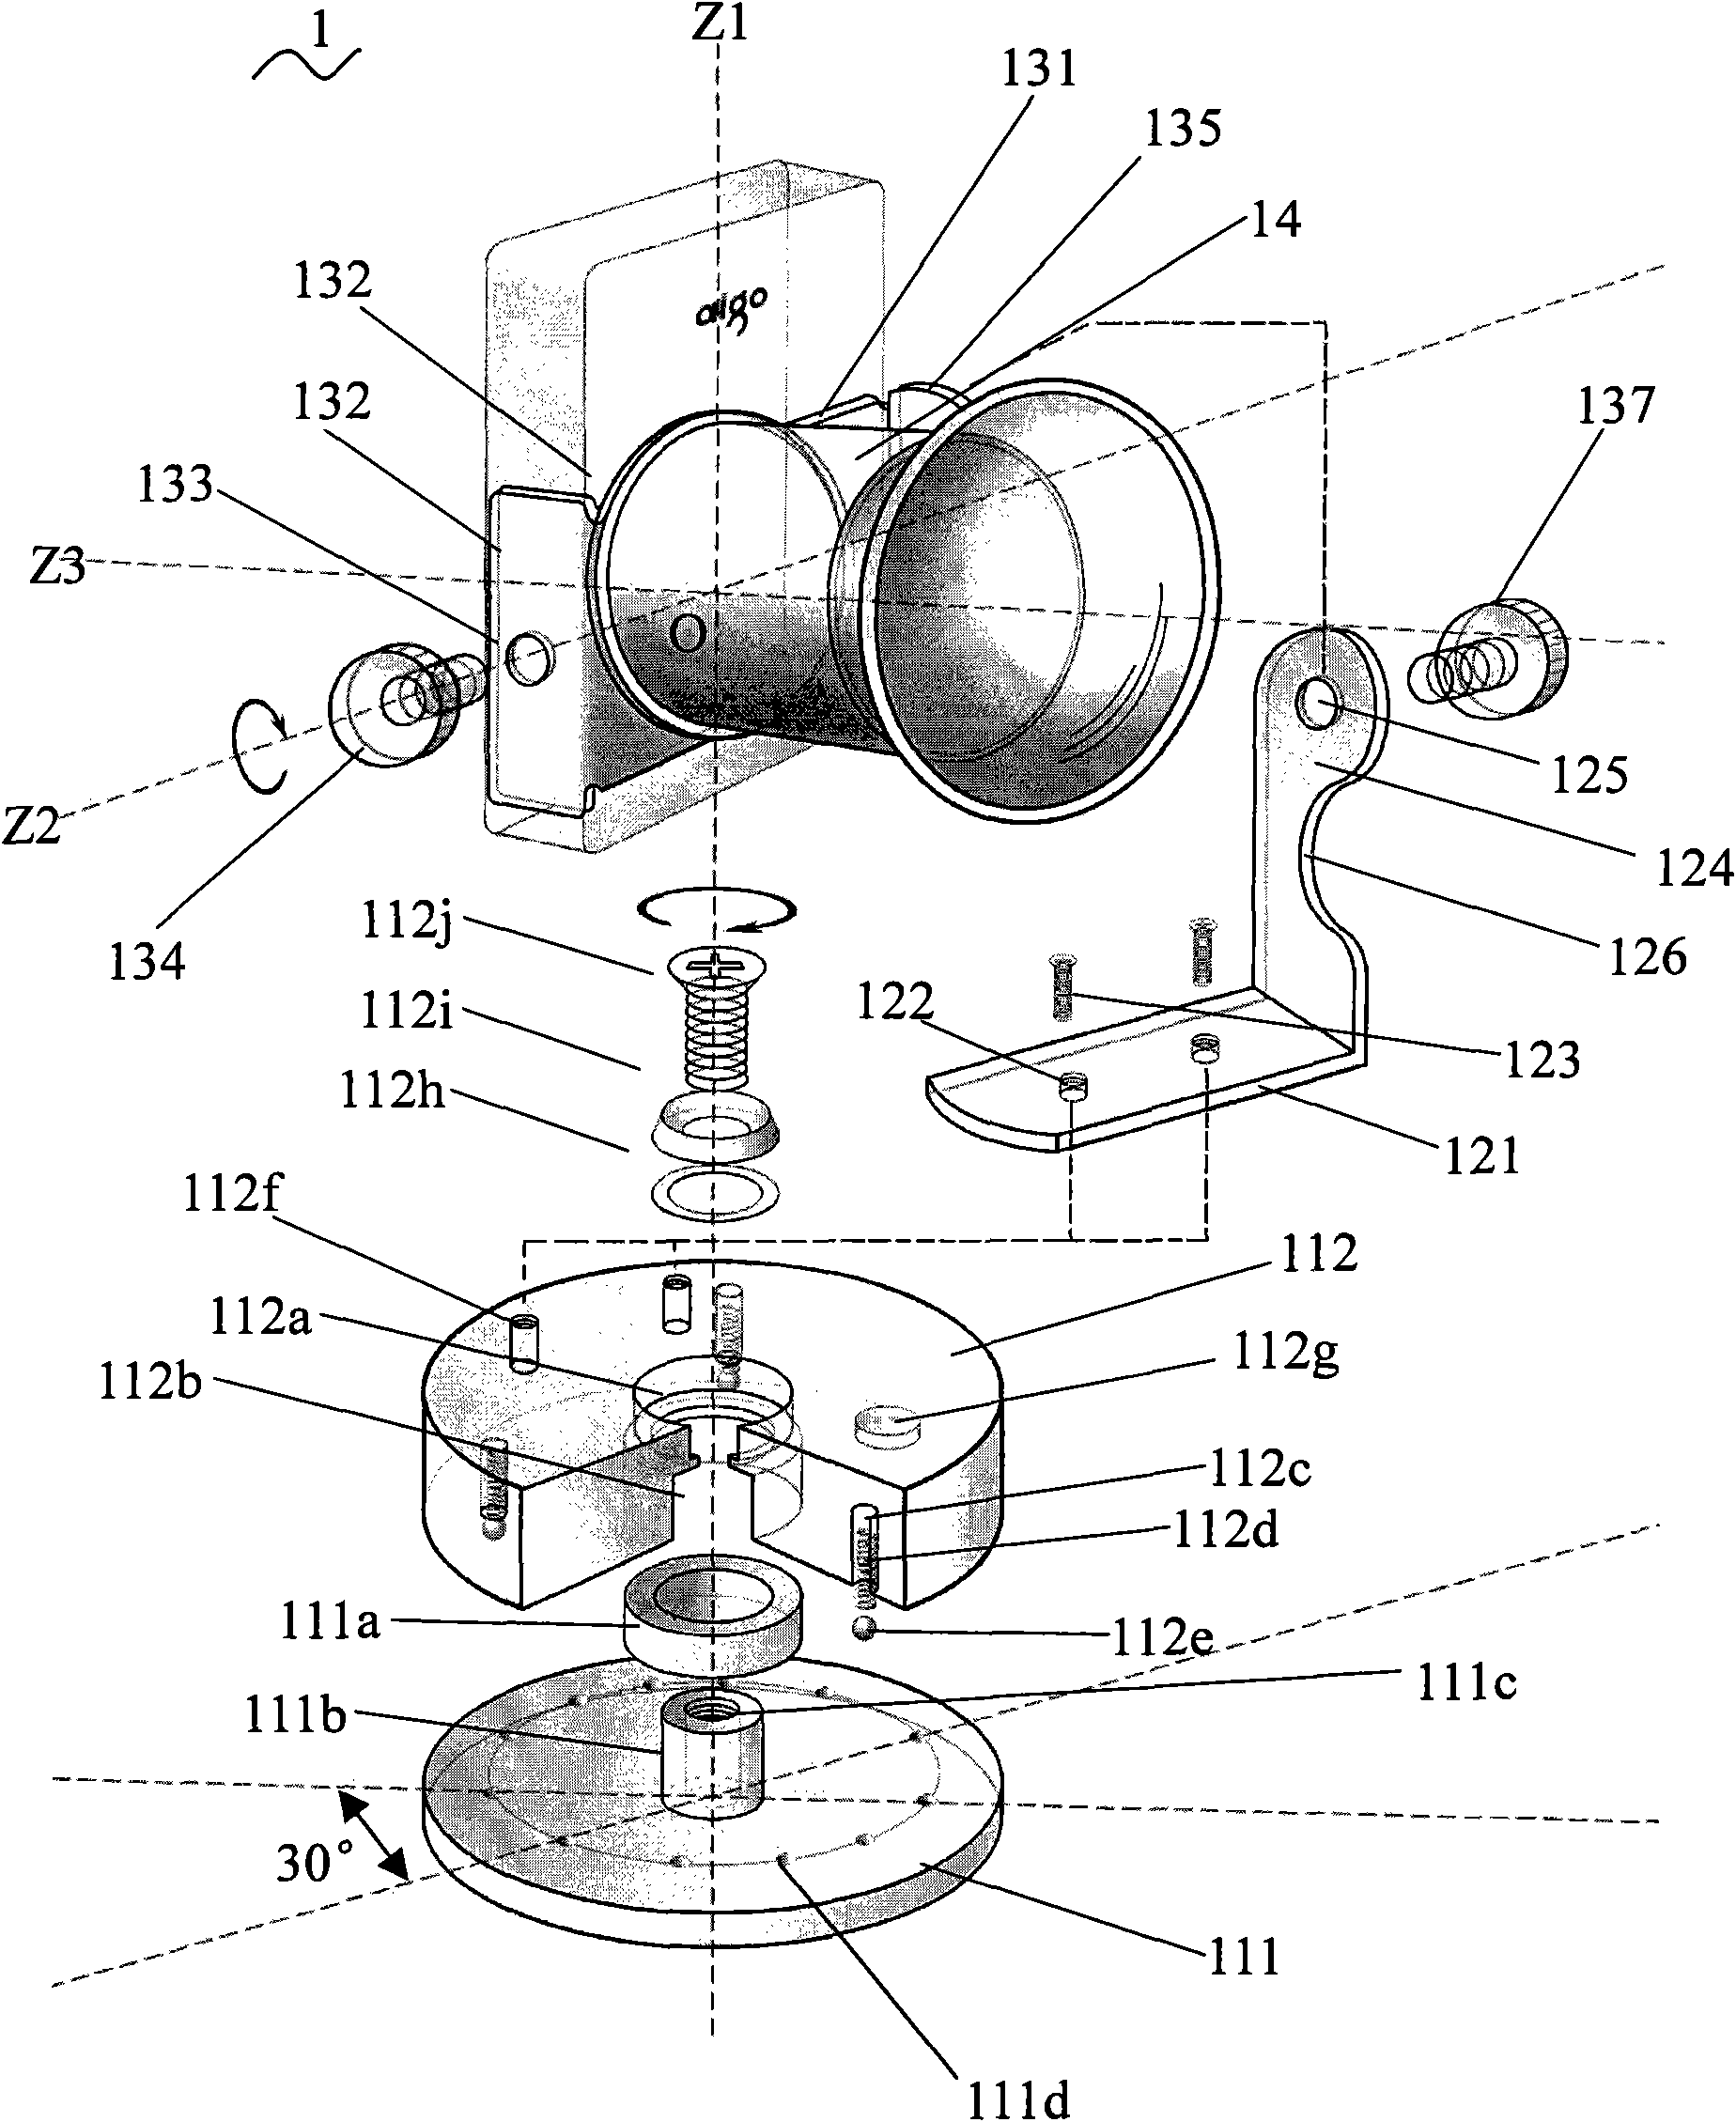 Full-view image shooting device